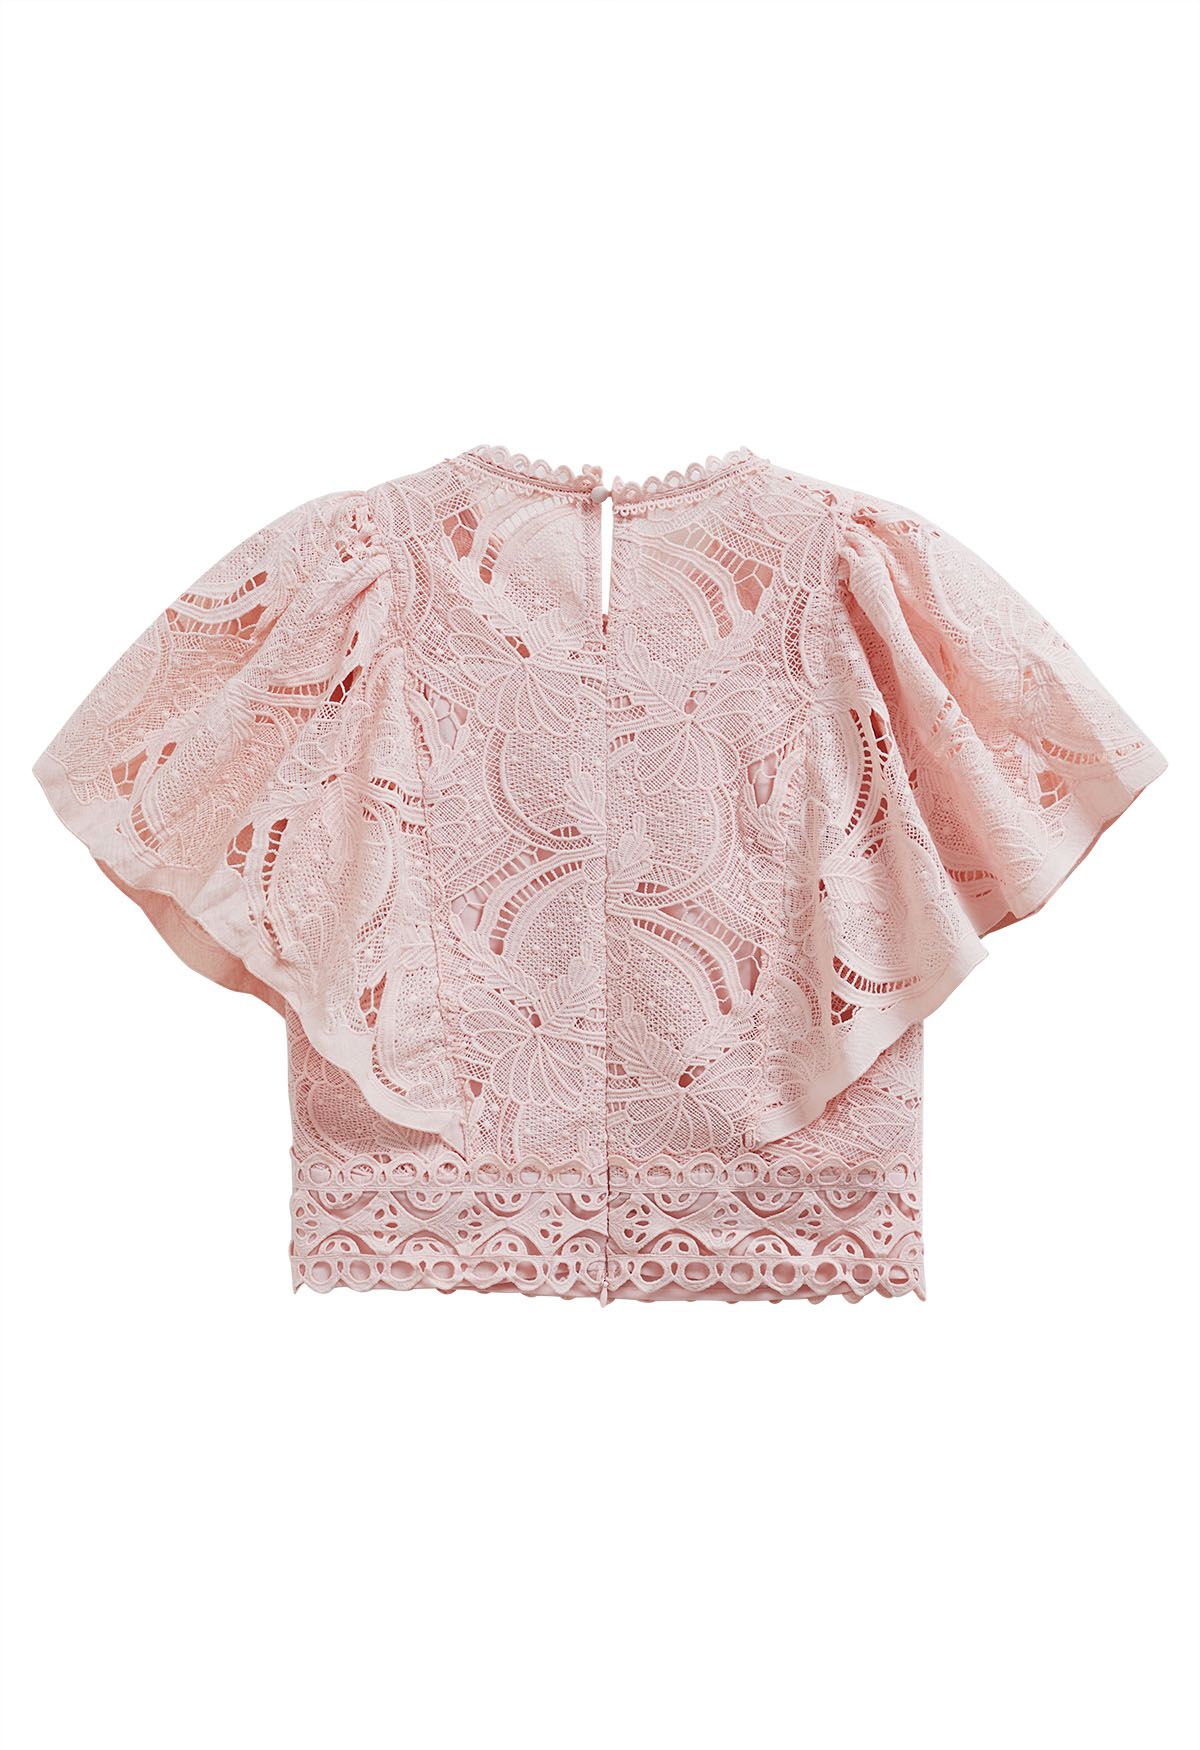 Leaves Cutwork Lace Flutter Sleeve Top in Pink